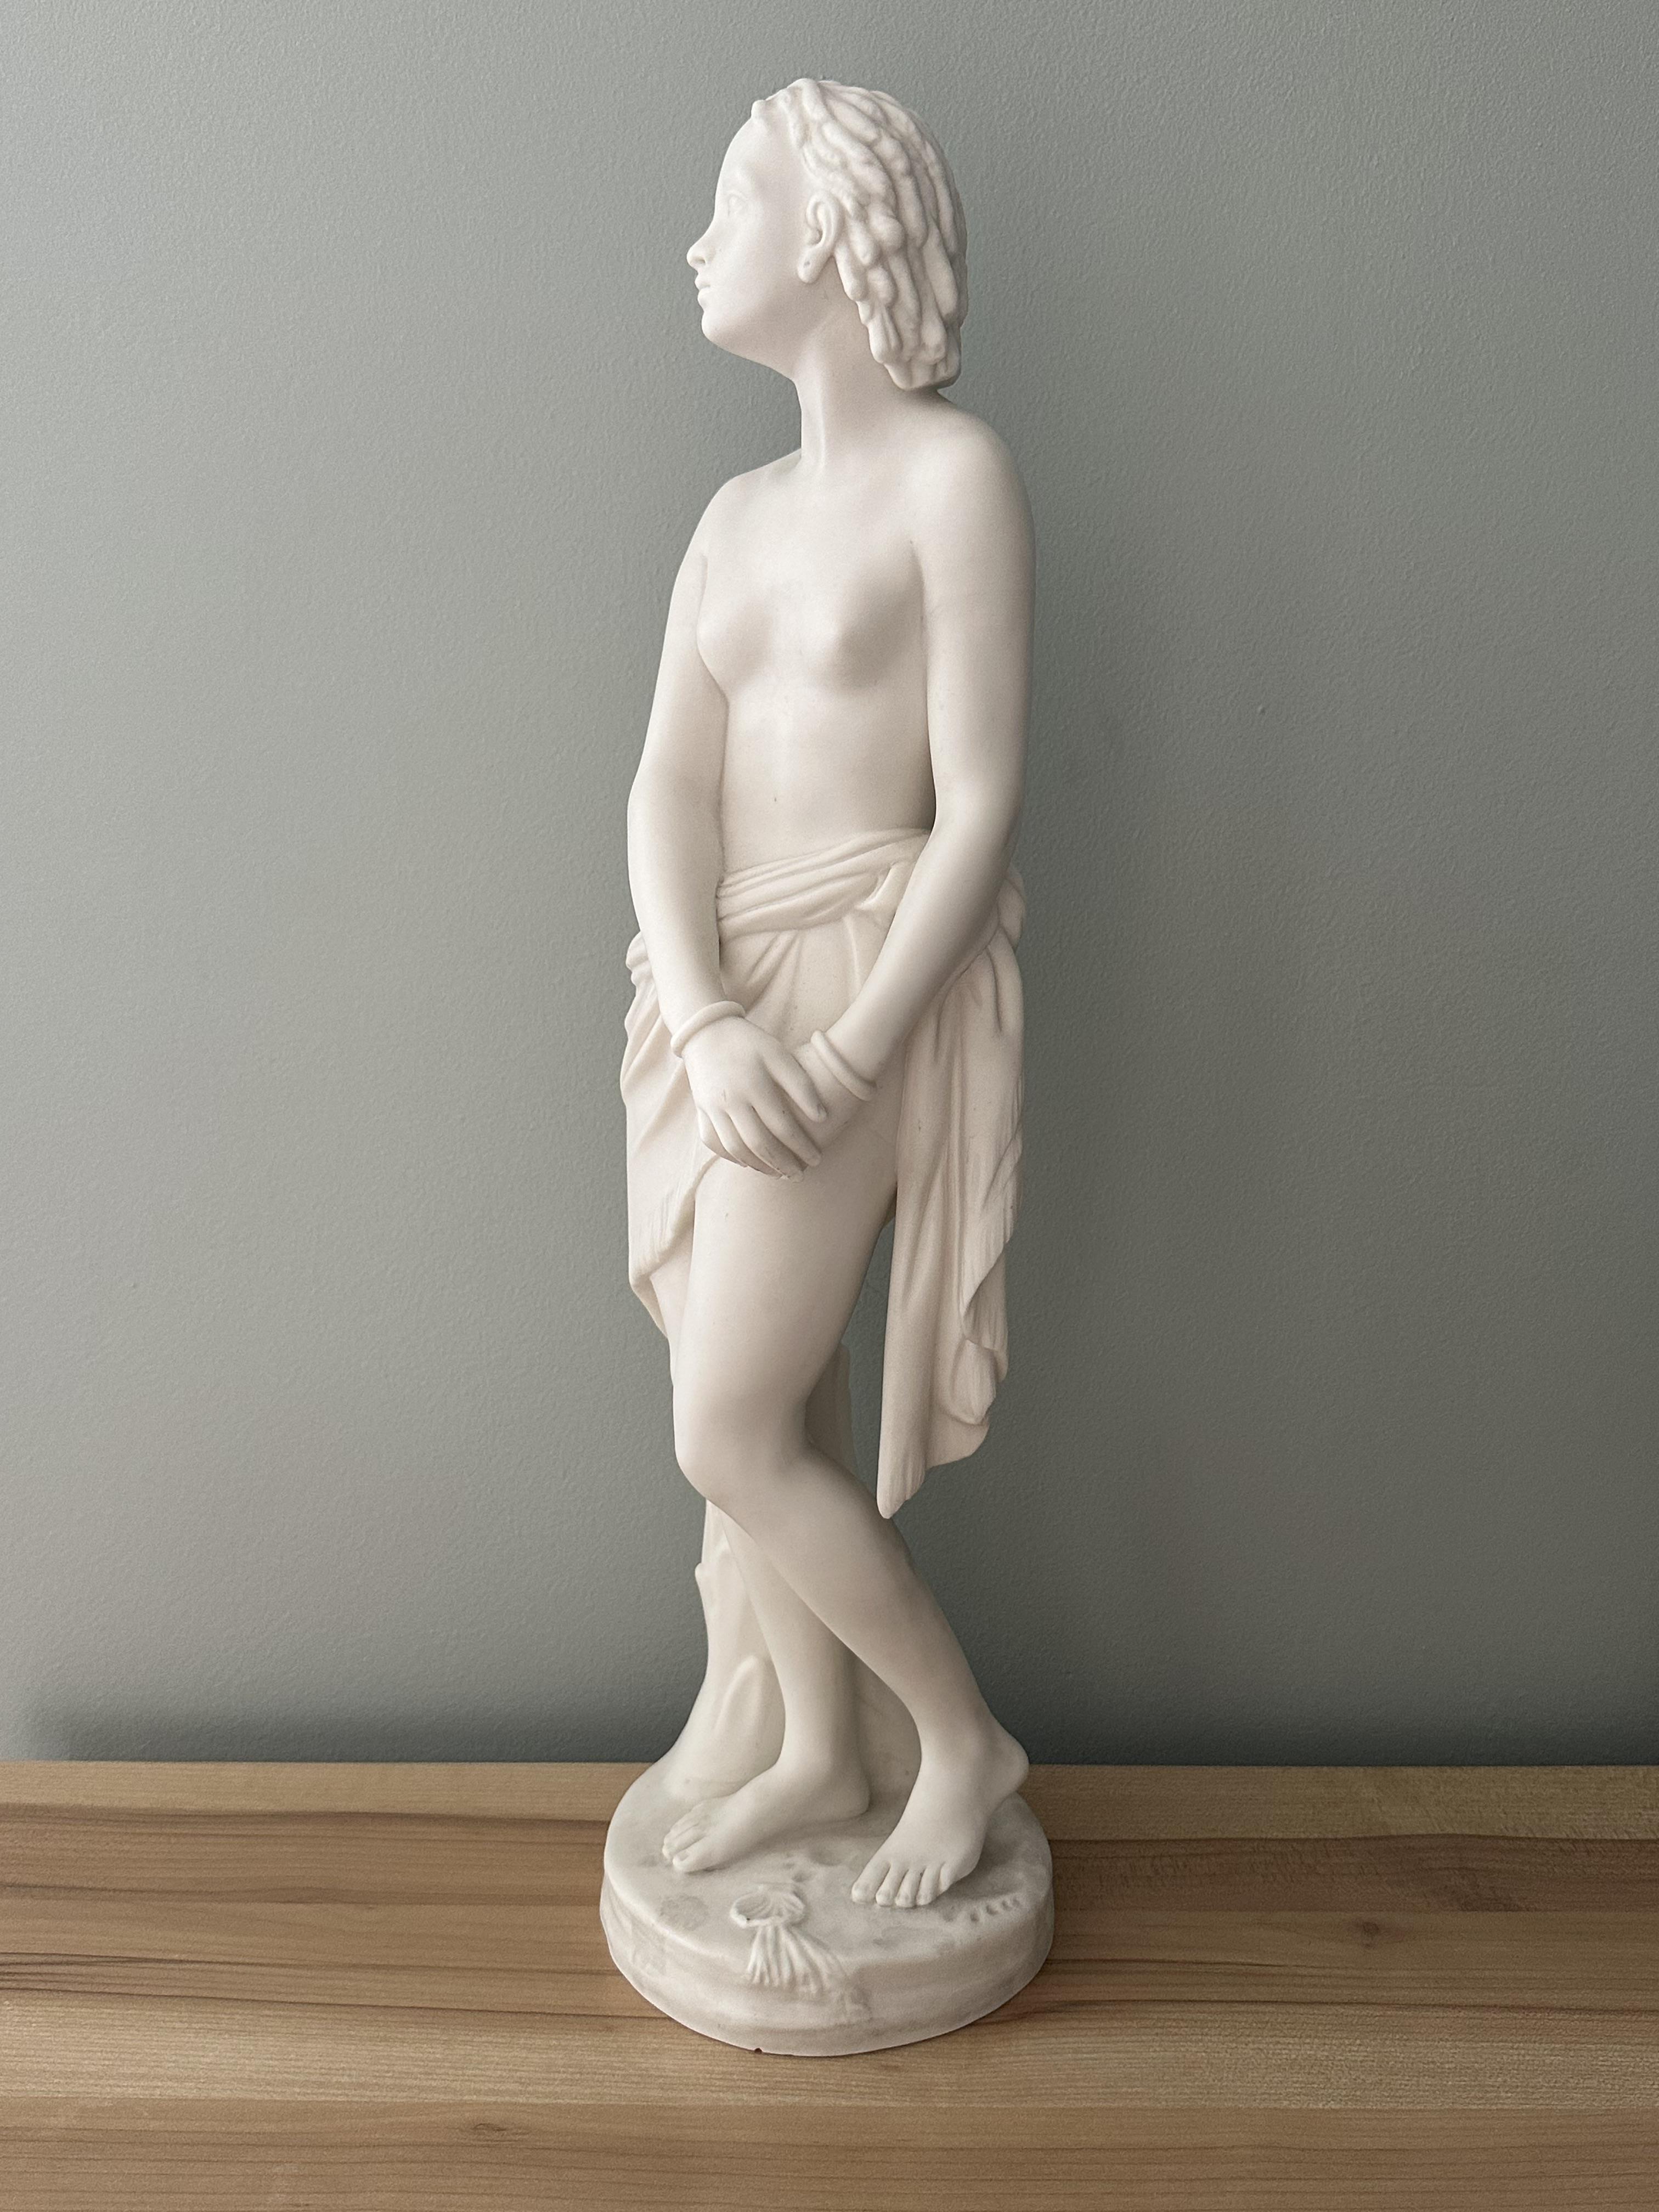 Parian Ware Minton Sculpture by John Bell. One ha - Image 3 of 16